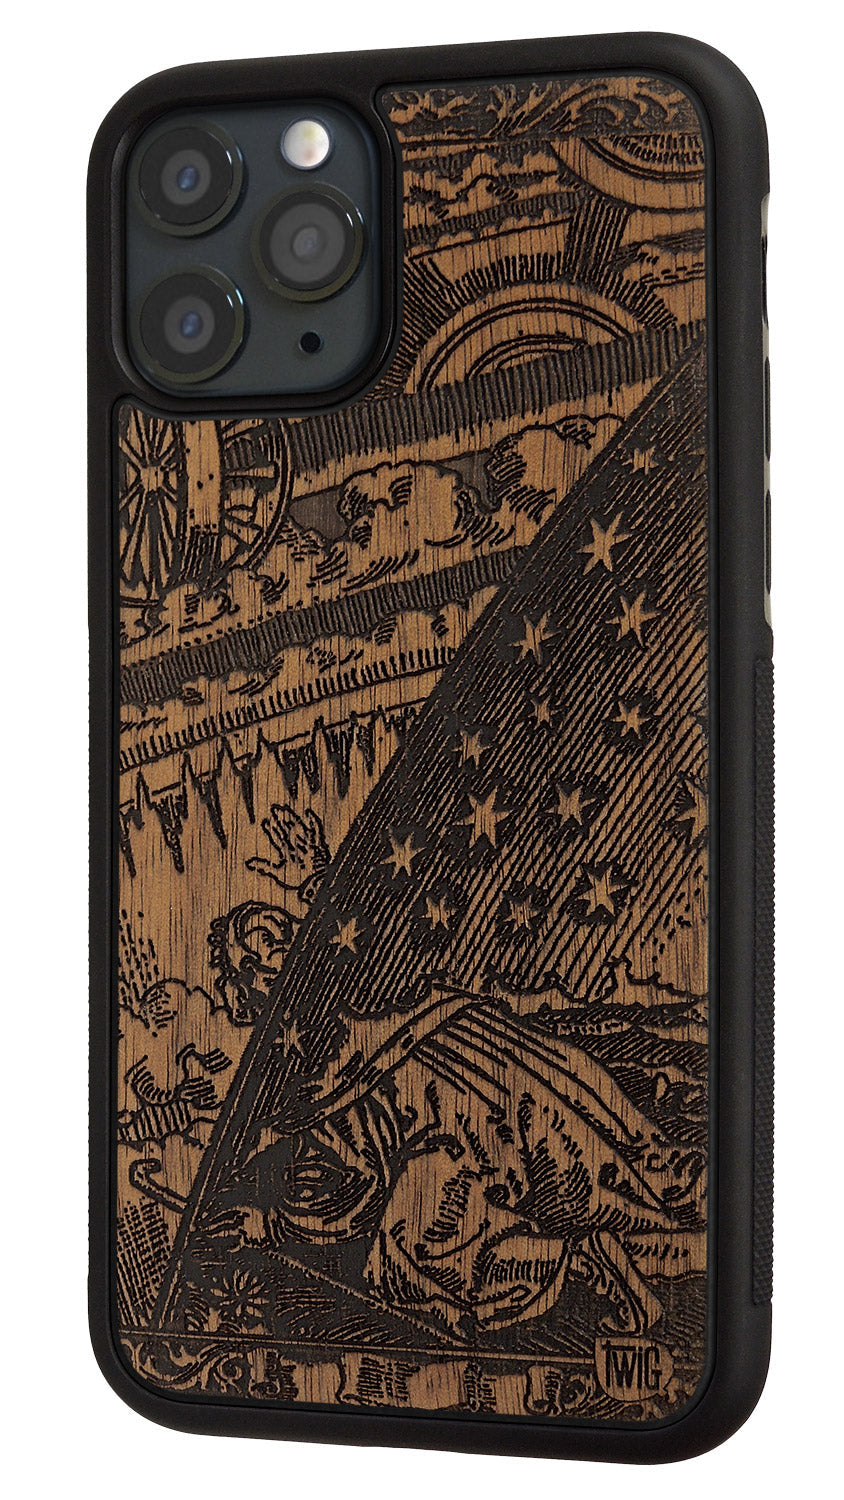 Beyond The Firmament - Walnut iPhone Case, iPhone Case - Twig Case Co.